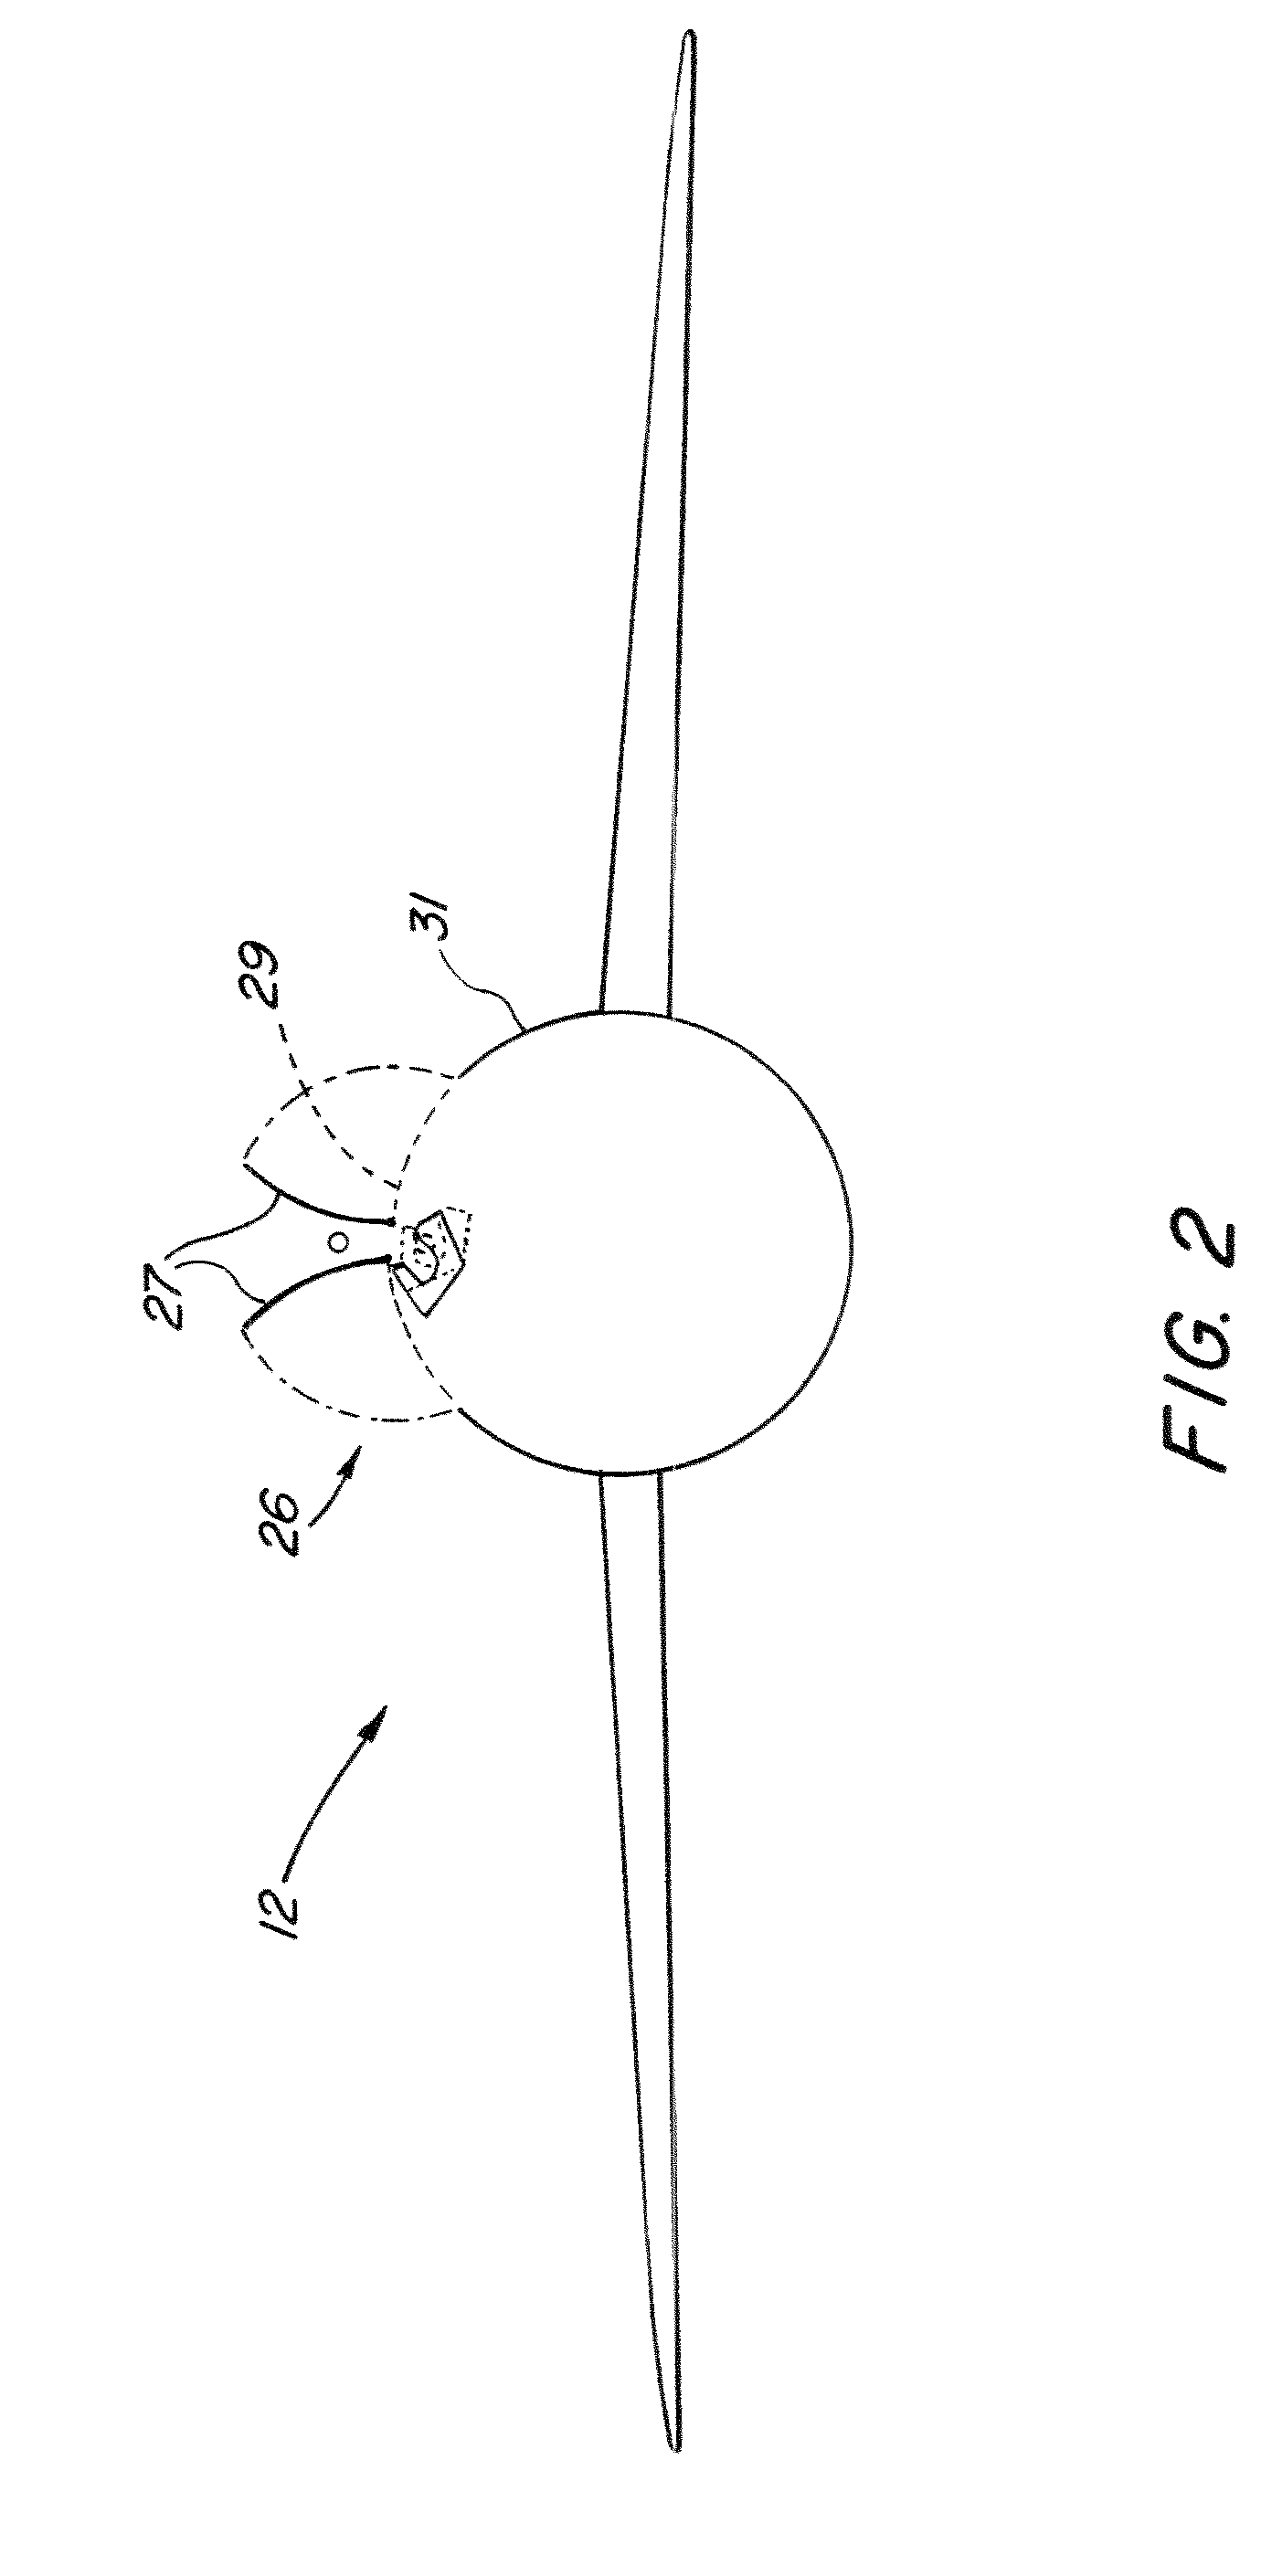 System and methods for airborne launch and recovery of aircraft